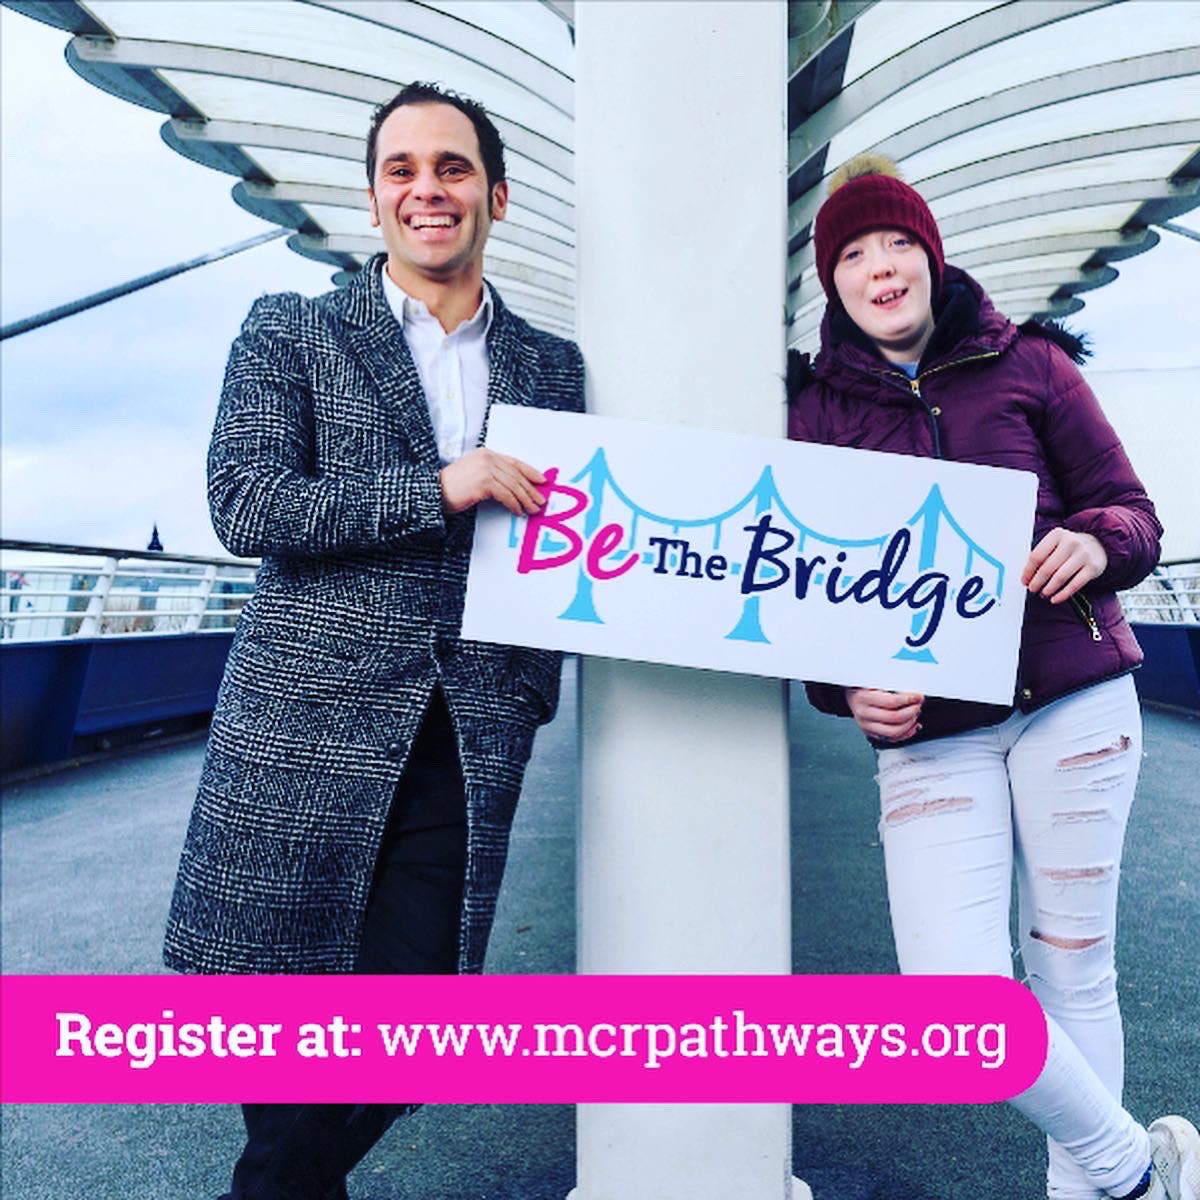 ‘Be The Bridge’ Our Founder Benedetto helping to promote a recent MCR Pathways campaign.